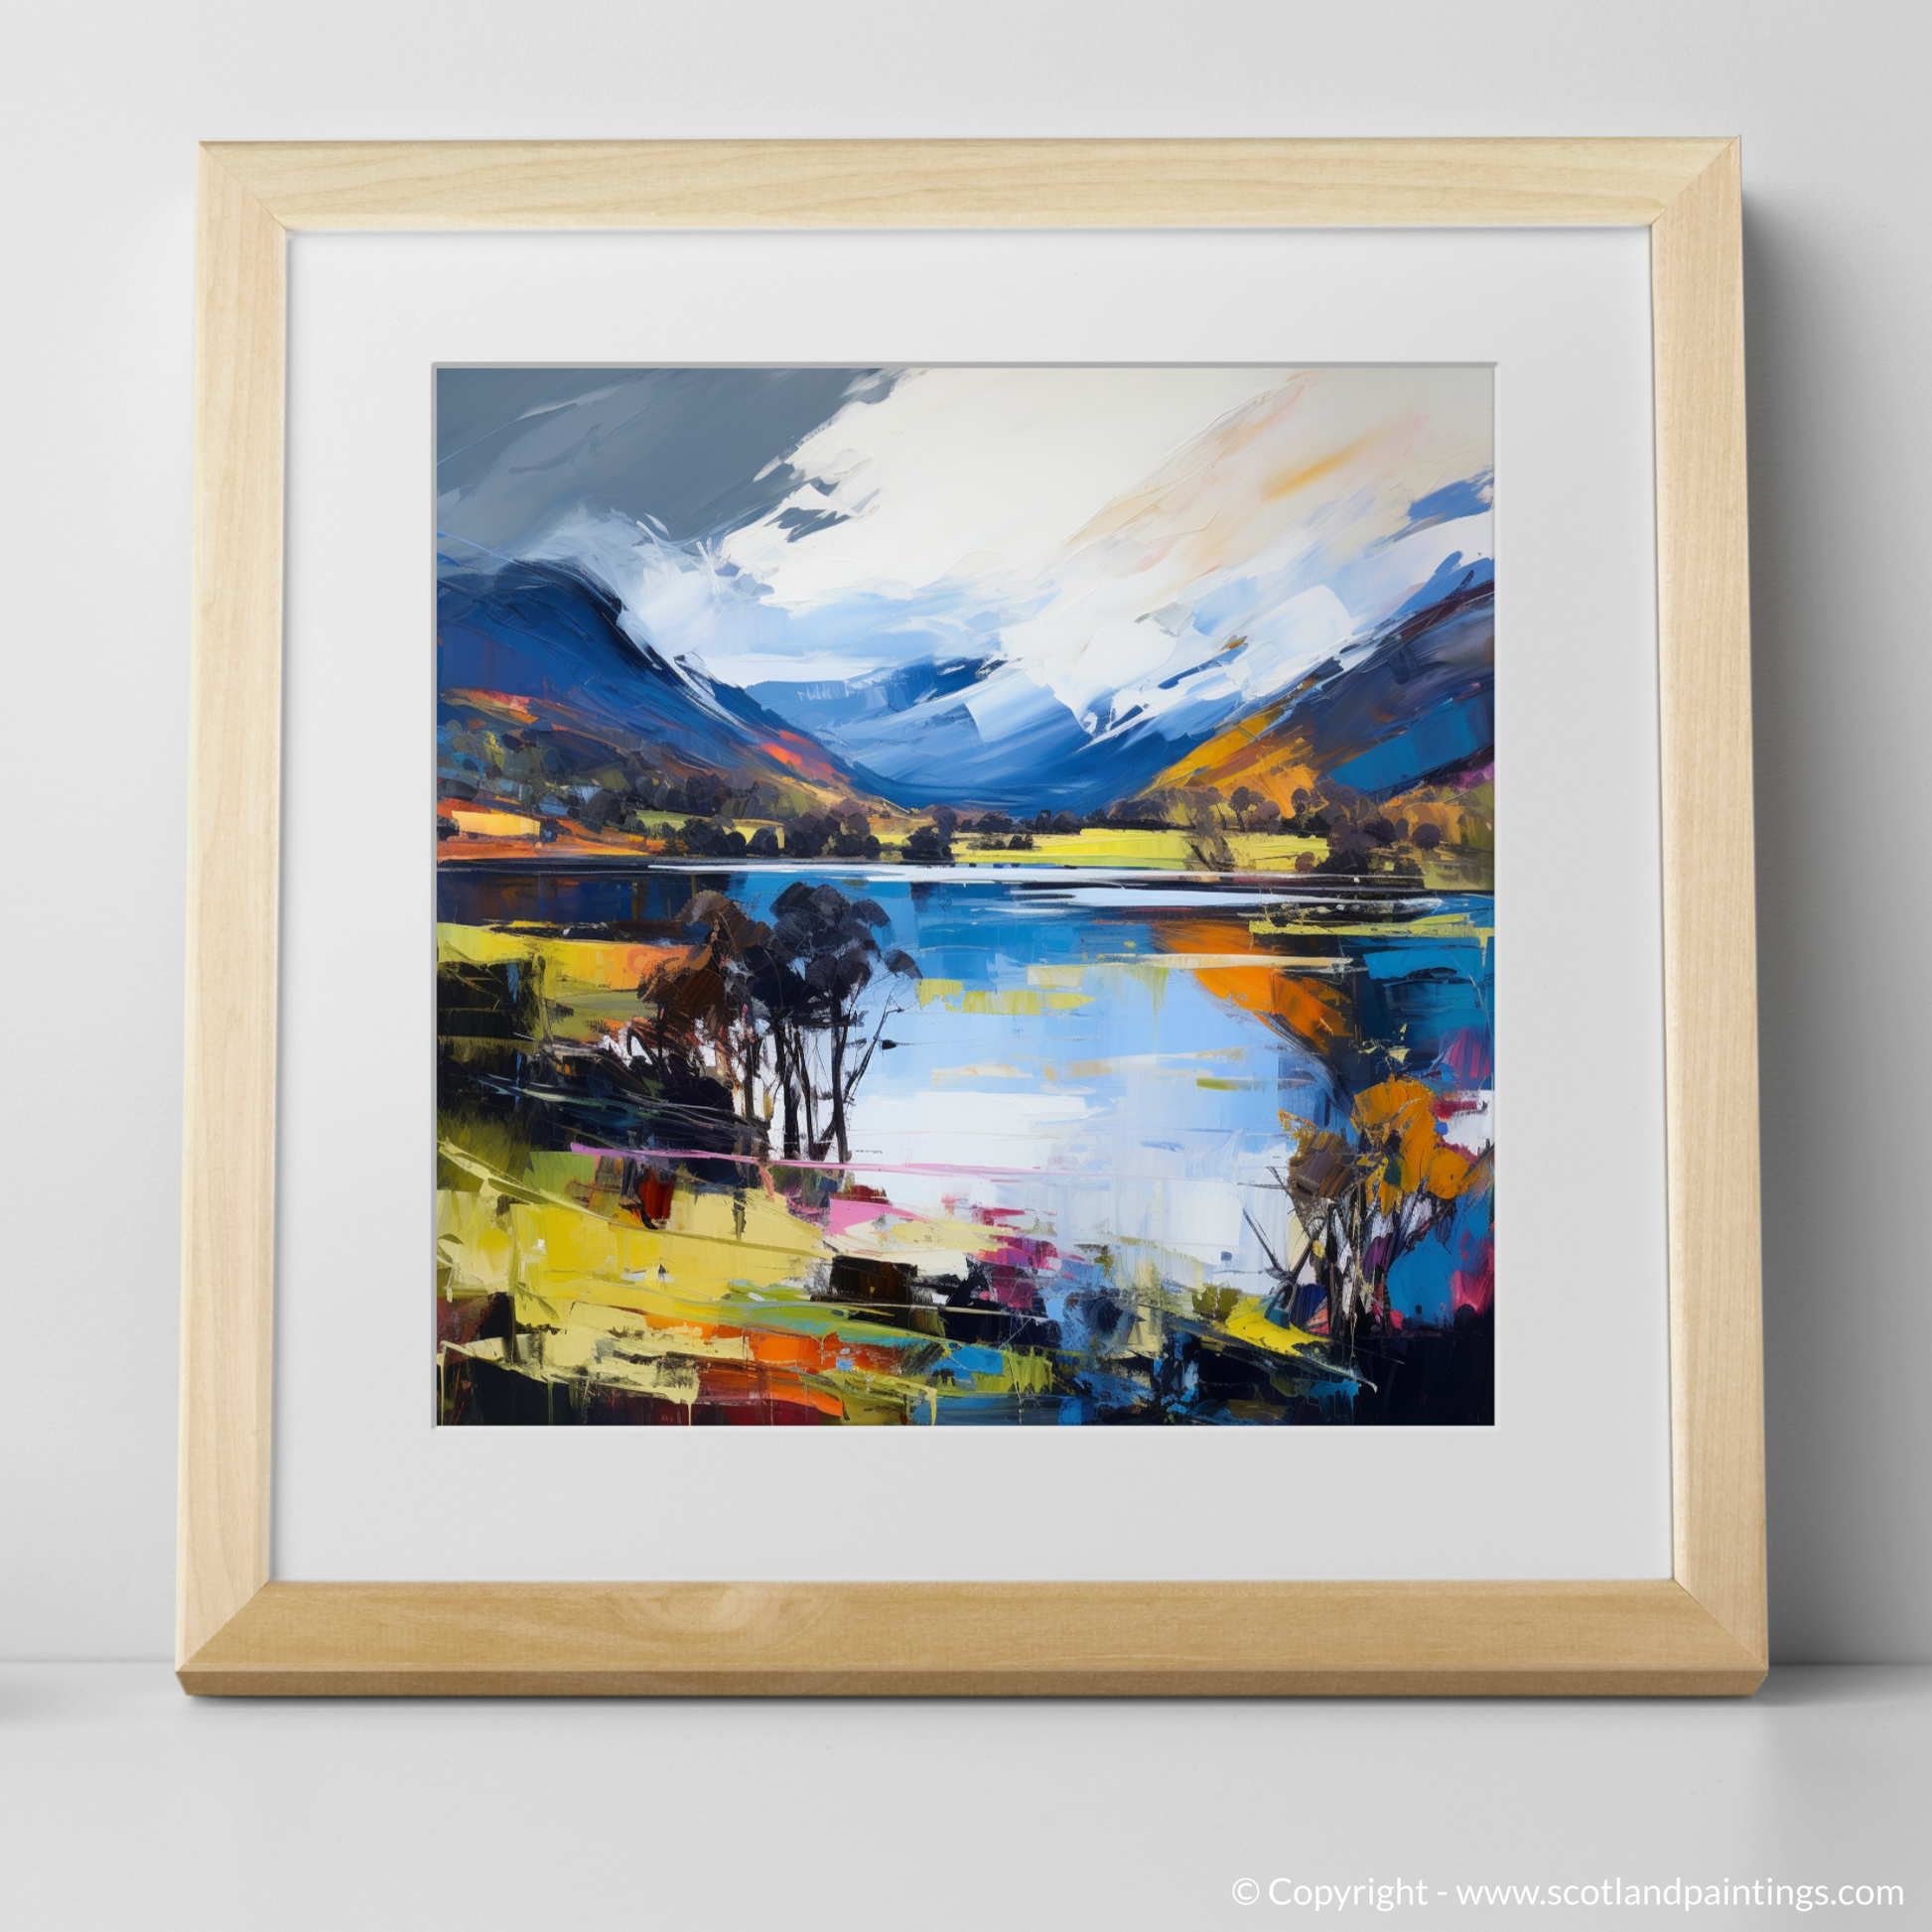 Art Print of Loch Earn, Perth and Kinross with a natural frame